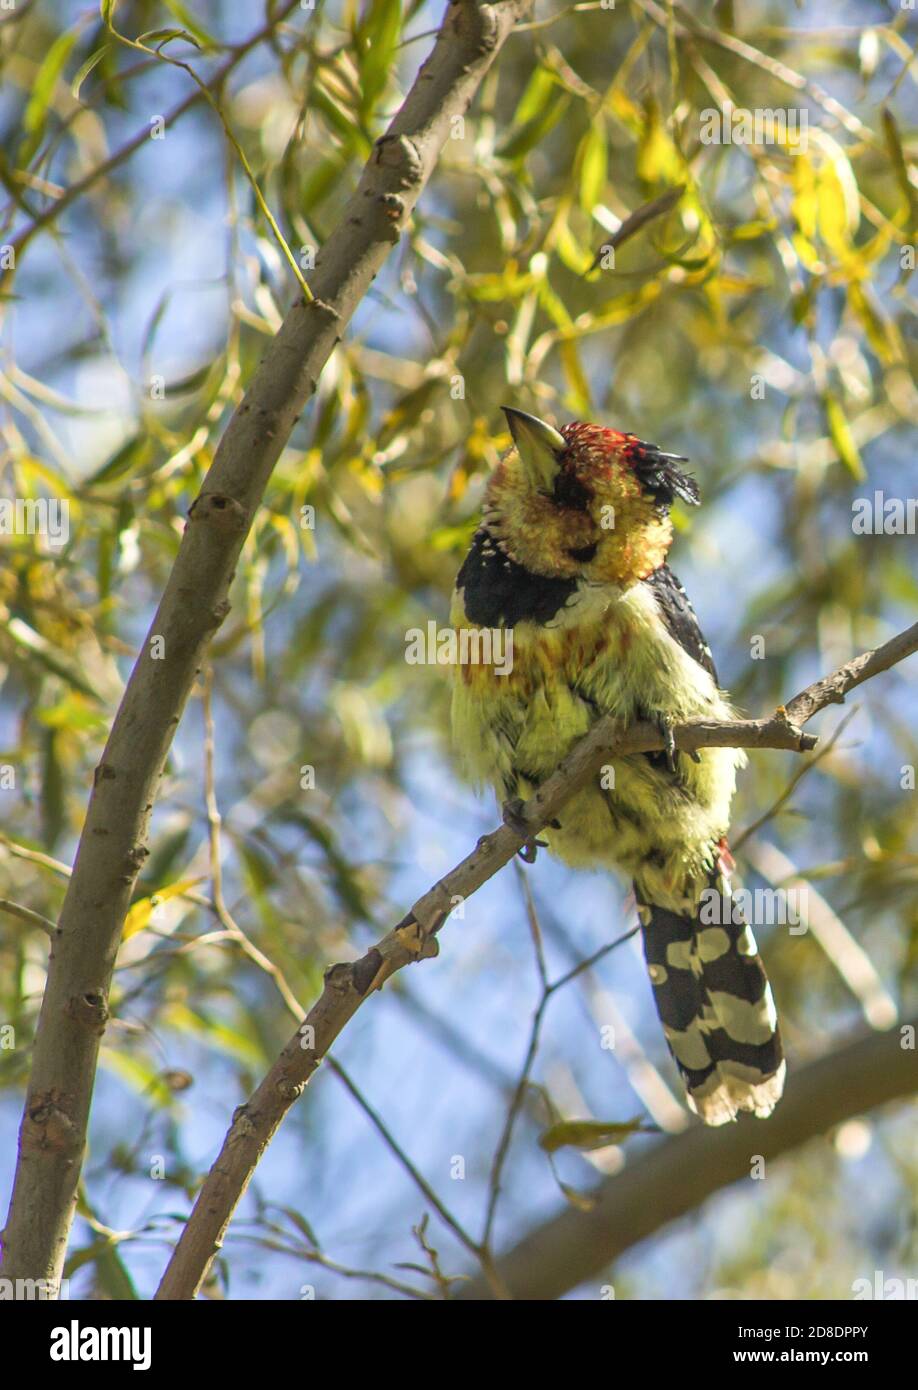 A crested barbet, Trachyphonus Vaillantii, perched on thin branches, looking down at the photographer, photographed in the Golden Gate Highlands Natio Stock Photo